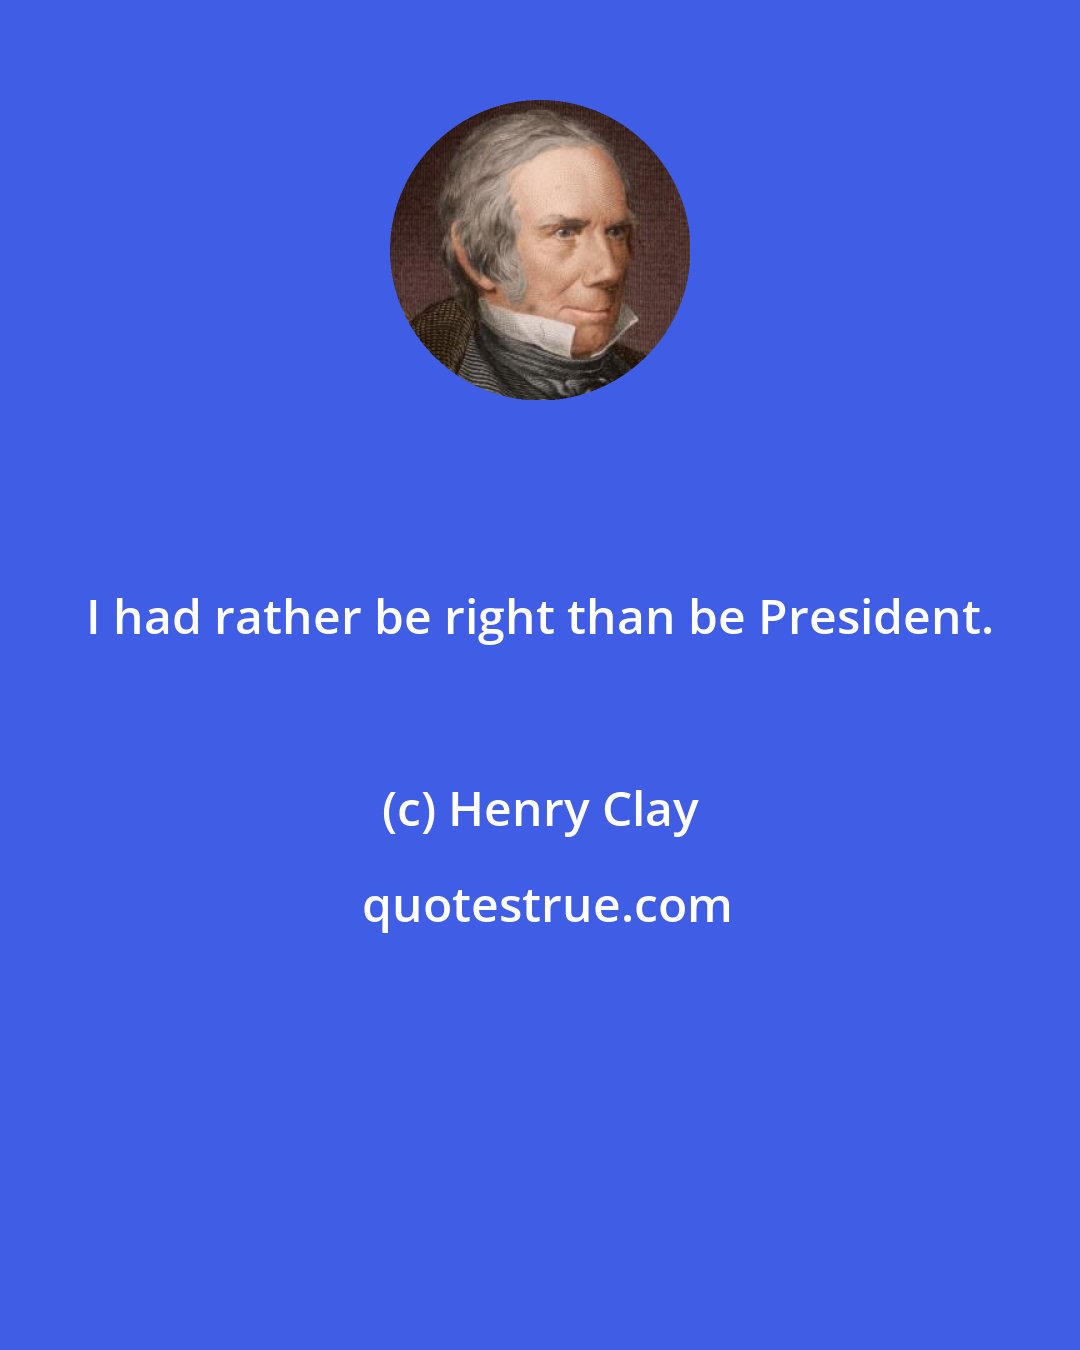 Henry Clay: I had rather be right than be President.